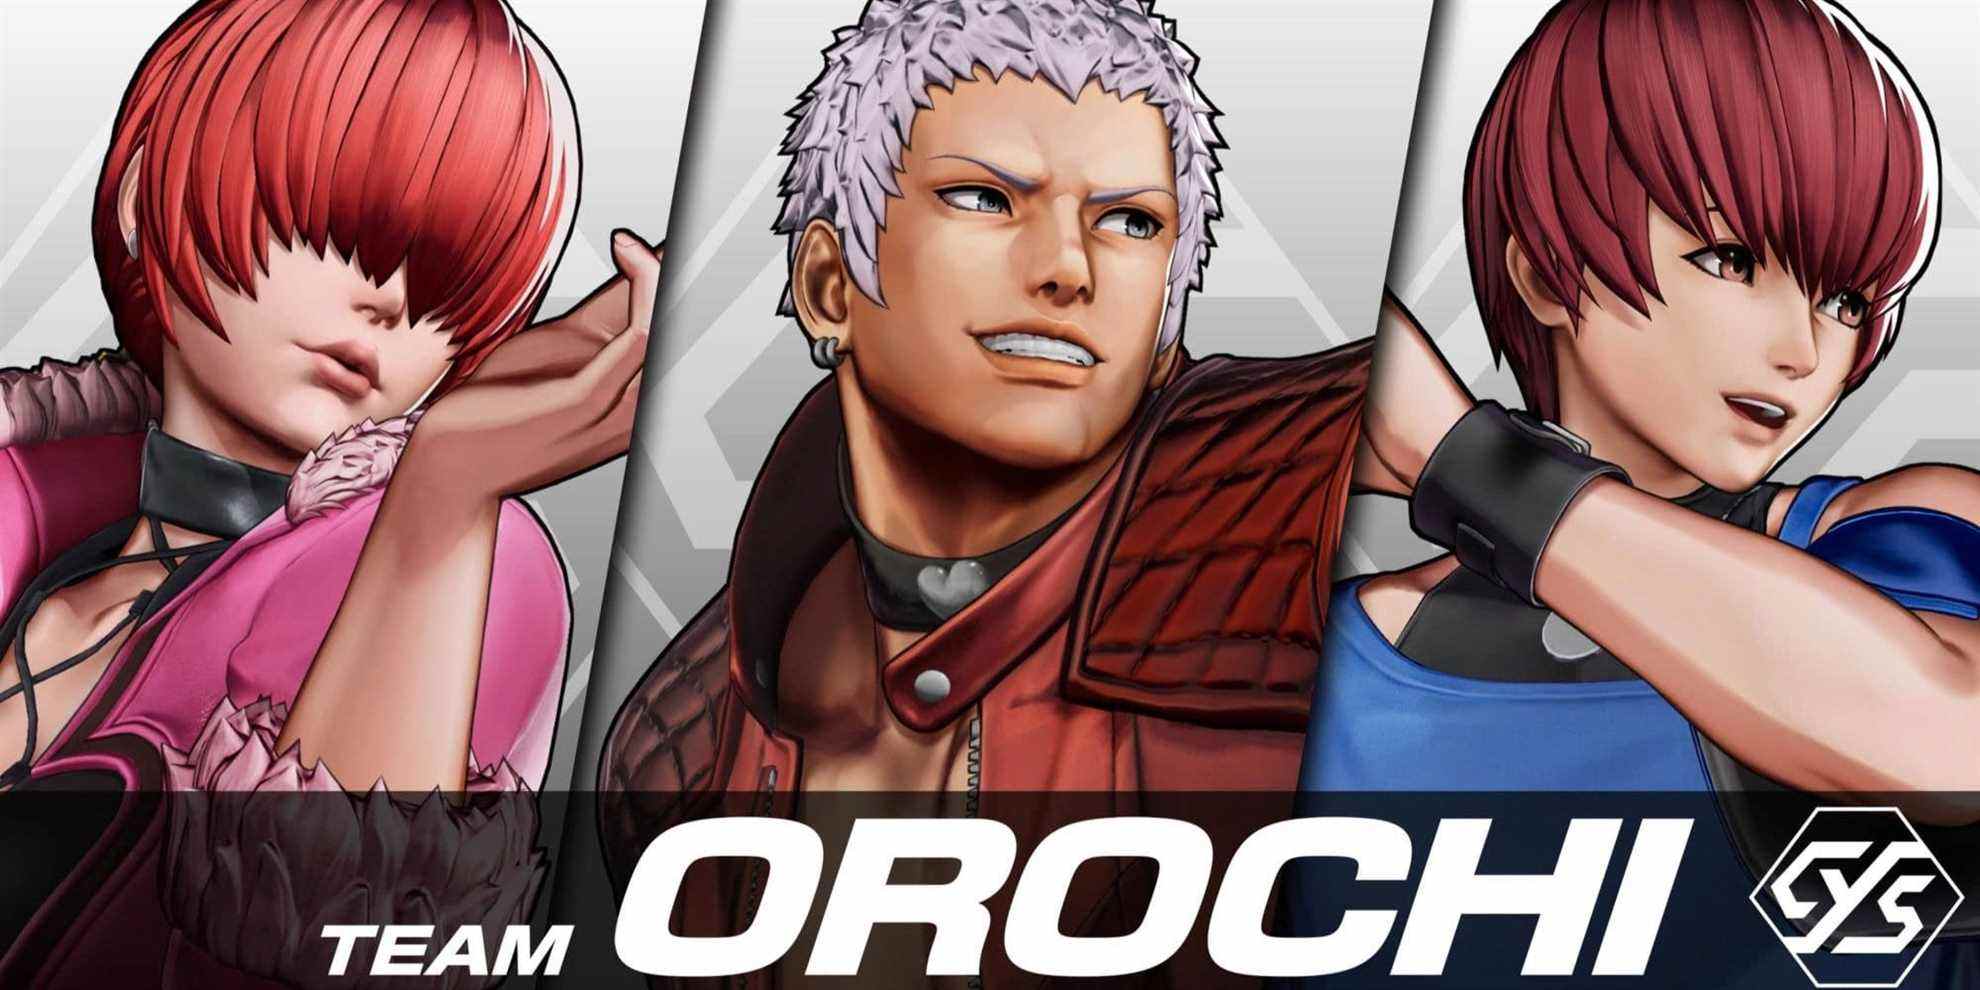 Équipe Orochi dans The King of Fighters 15